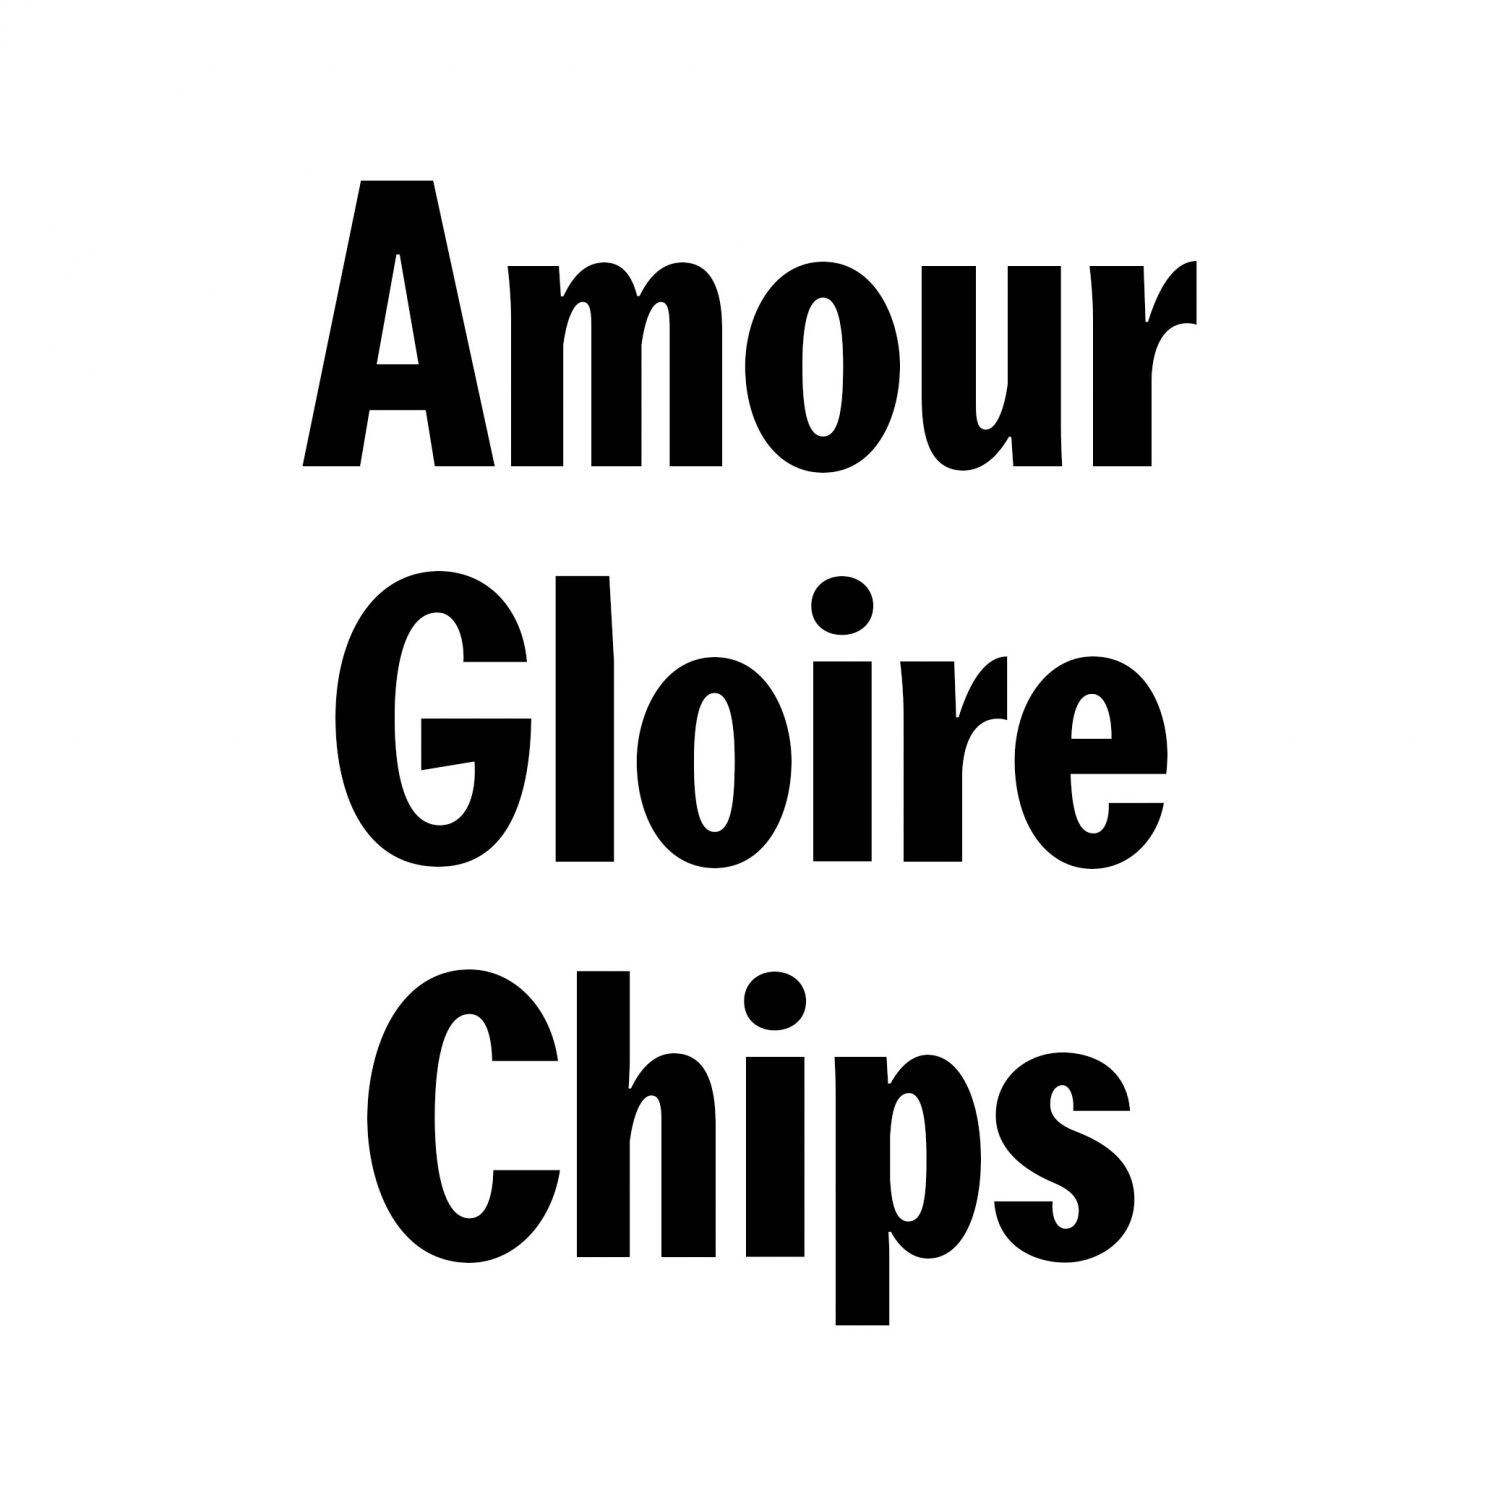 Amour, Gloire & Chips